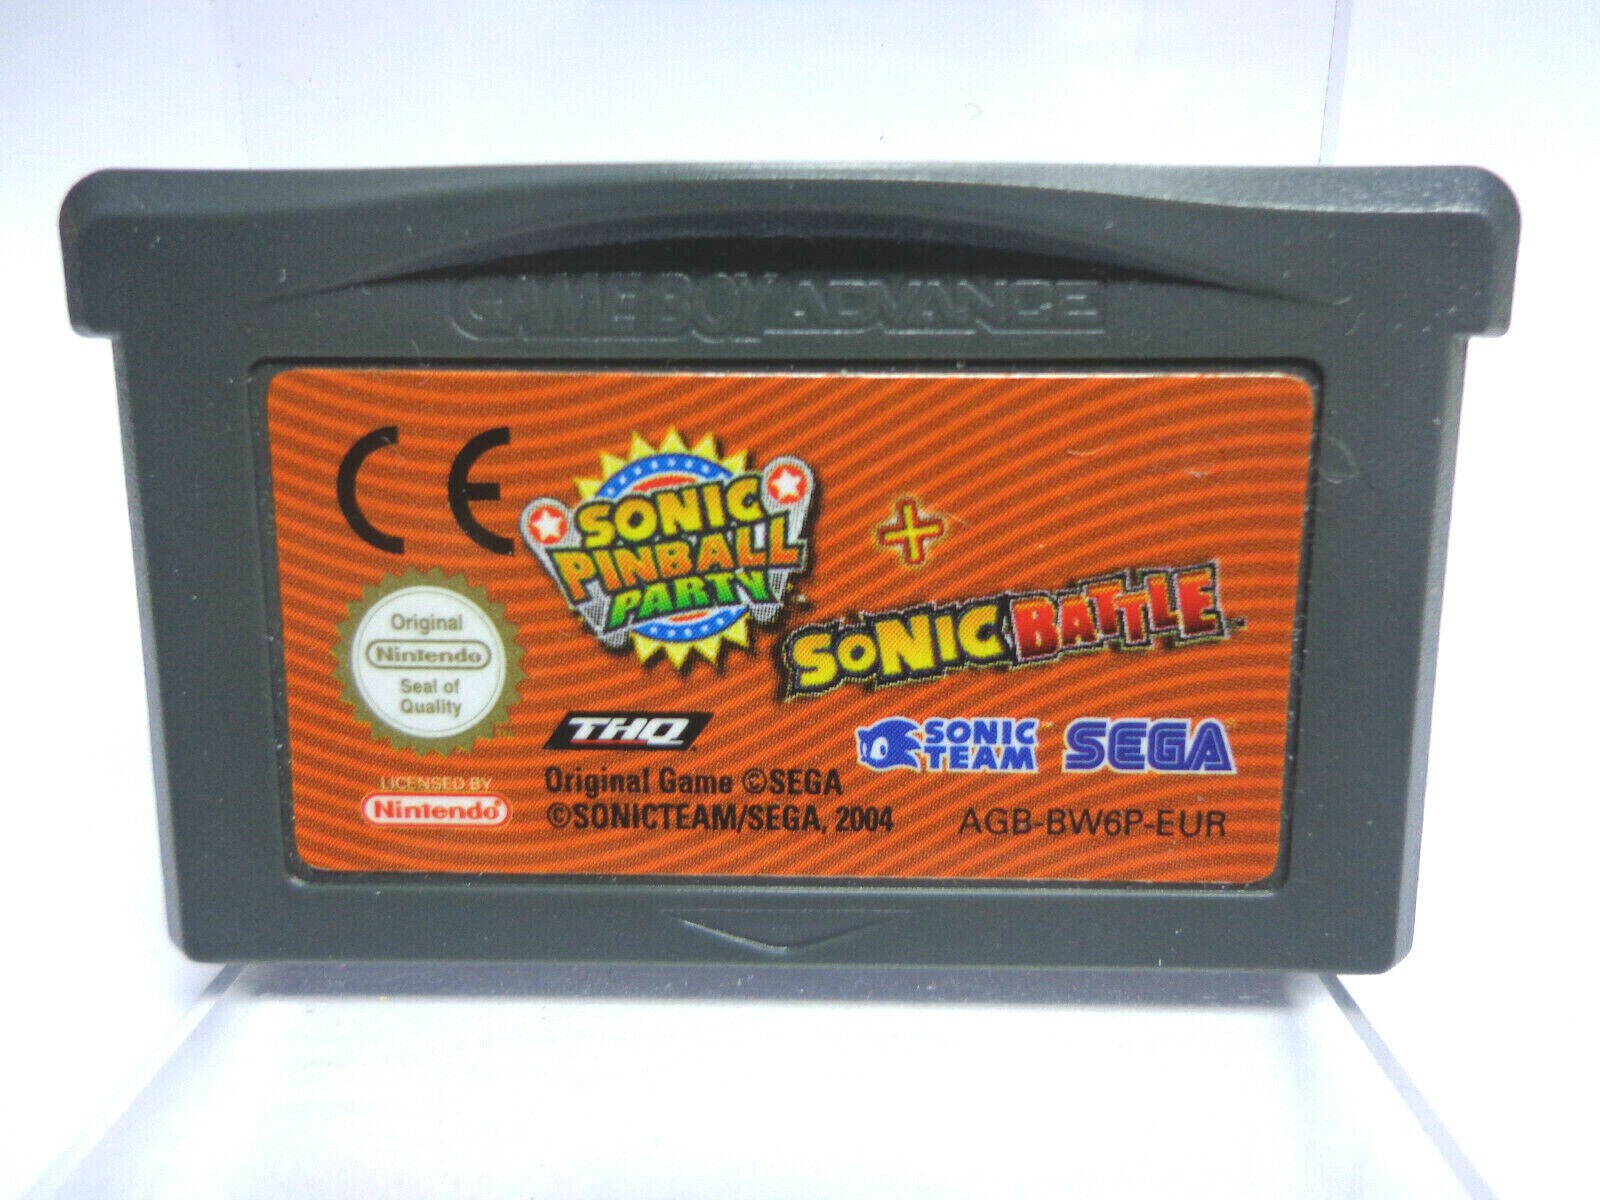 Sonic Pinball Party + Sonic Battle - Gameboy Advance Games